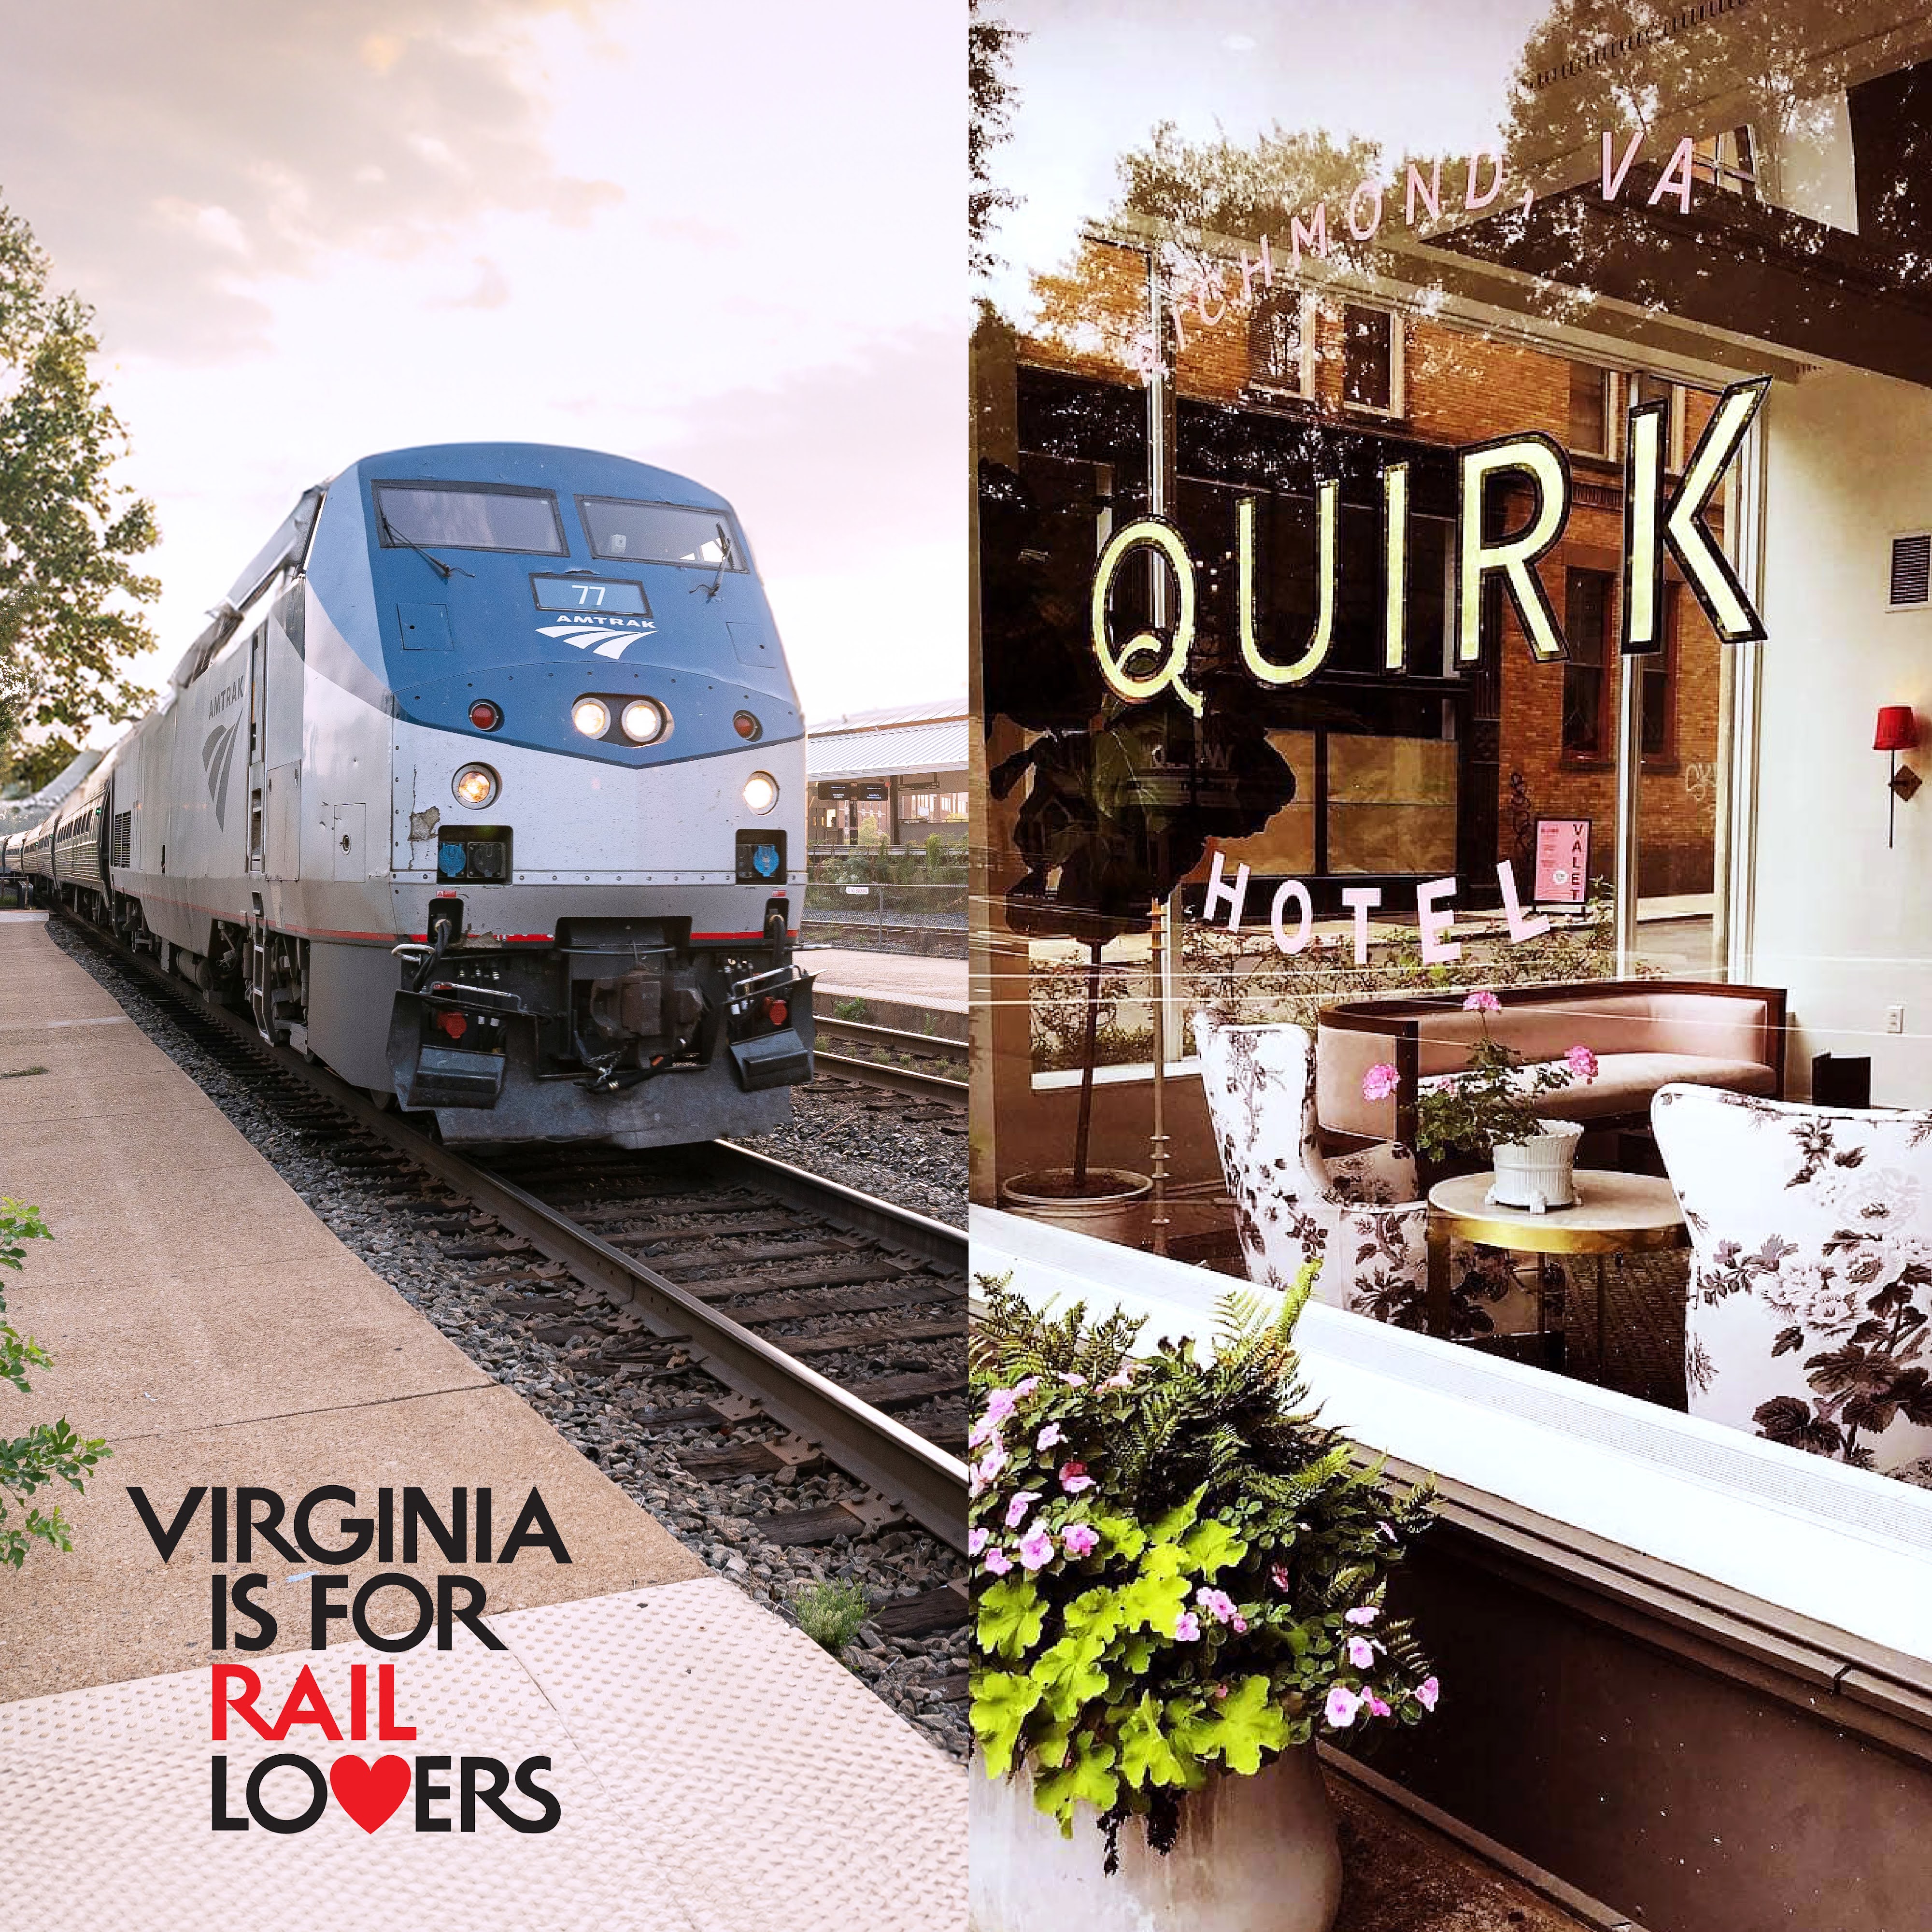 amtrak-train-and-quirk-hotels-image-split